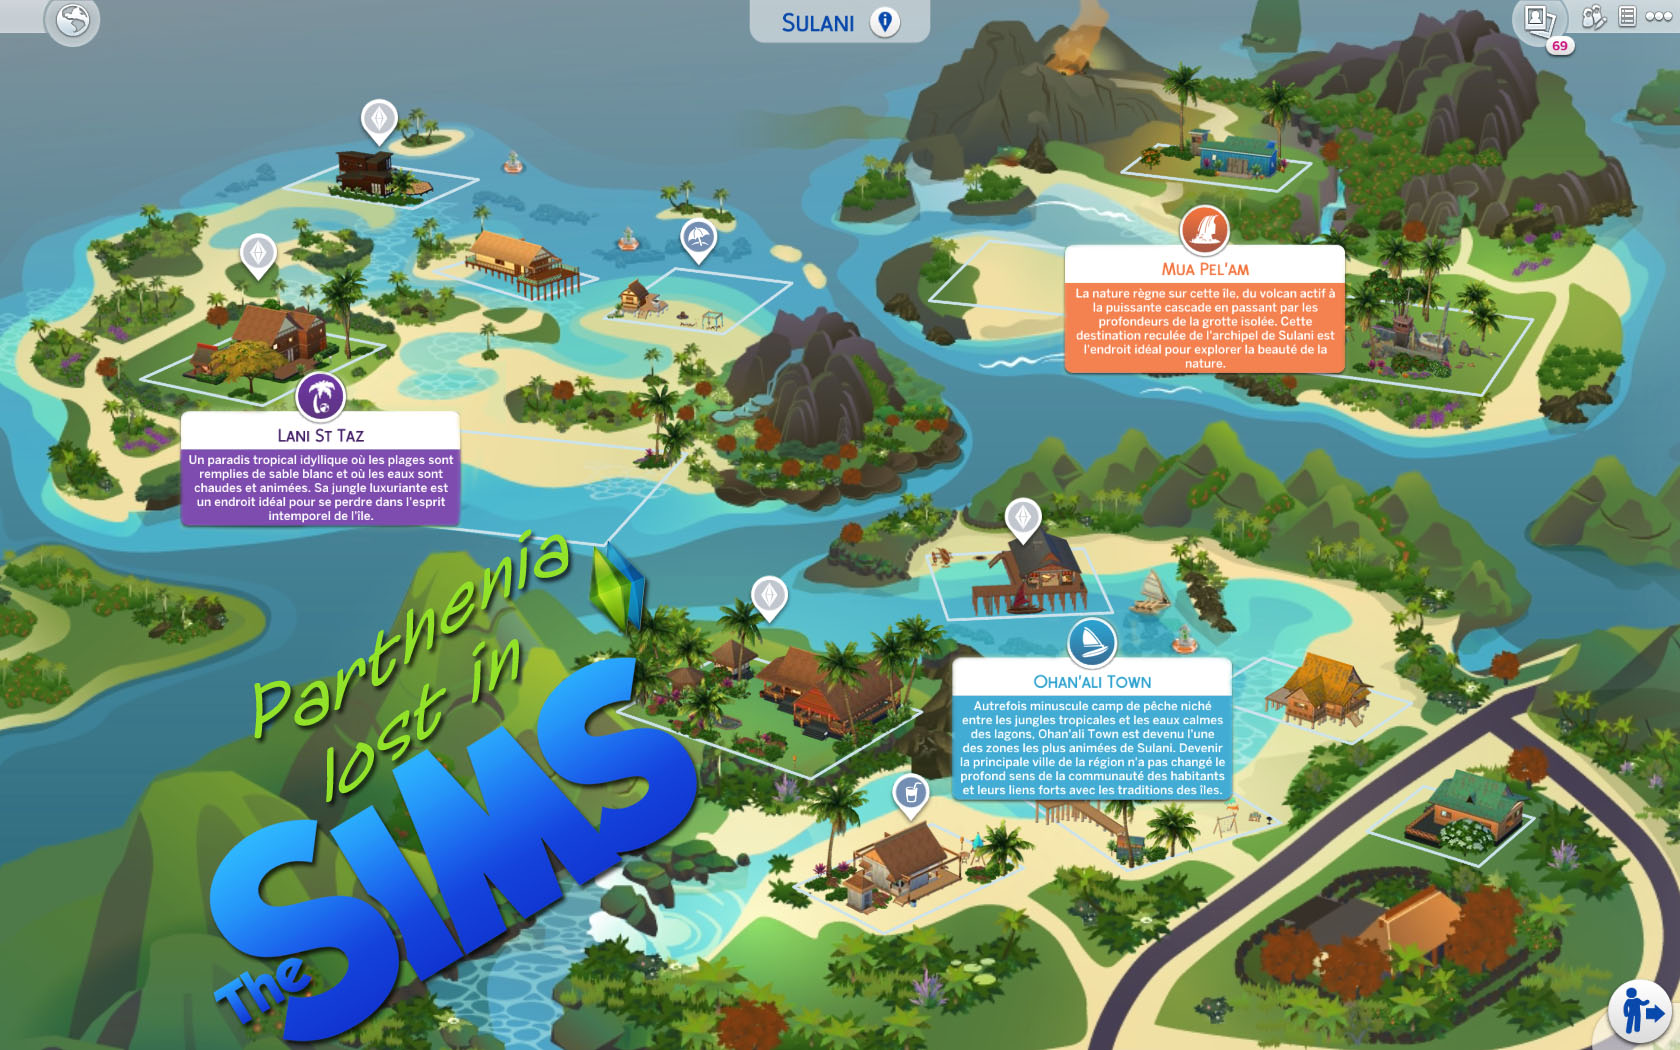 Sims 4 Îles paradisiaques : Sulani - Parthenia lost in Ze Sims